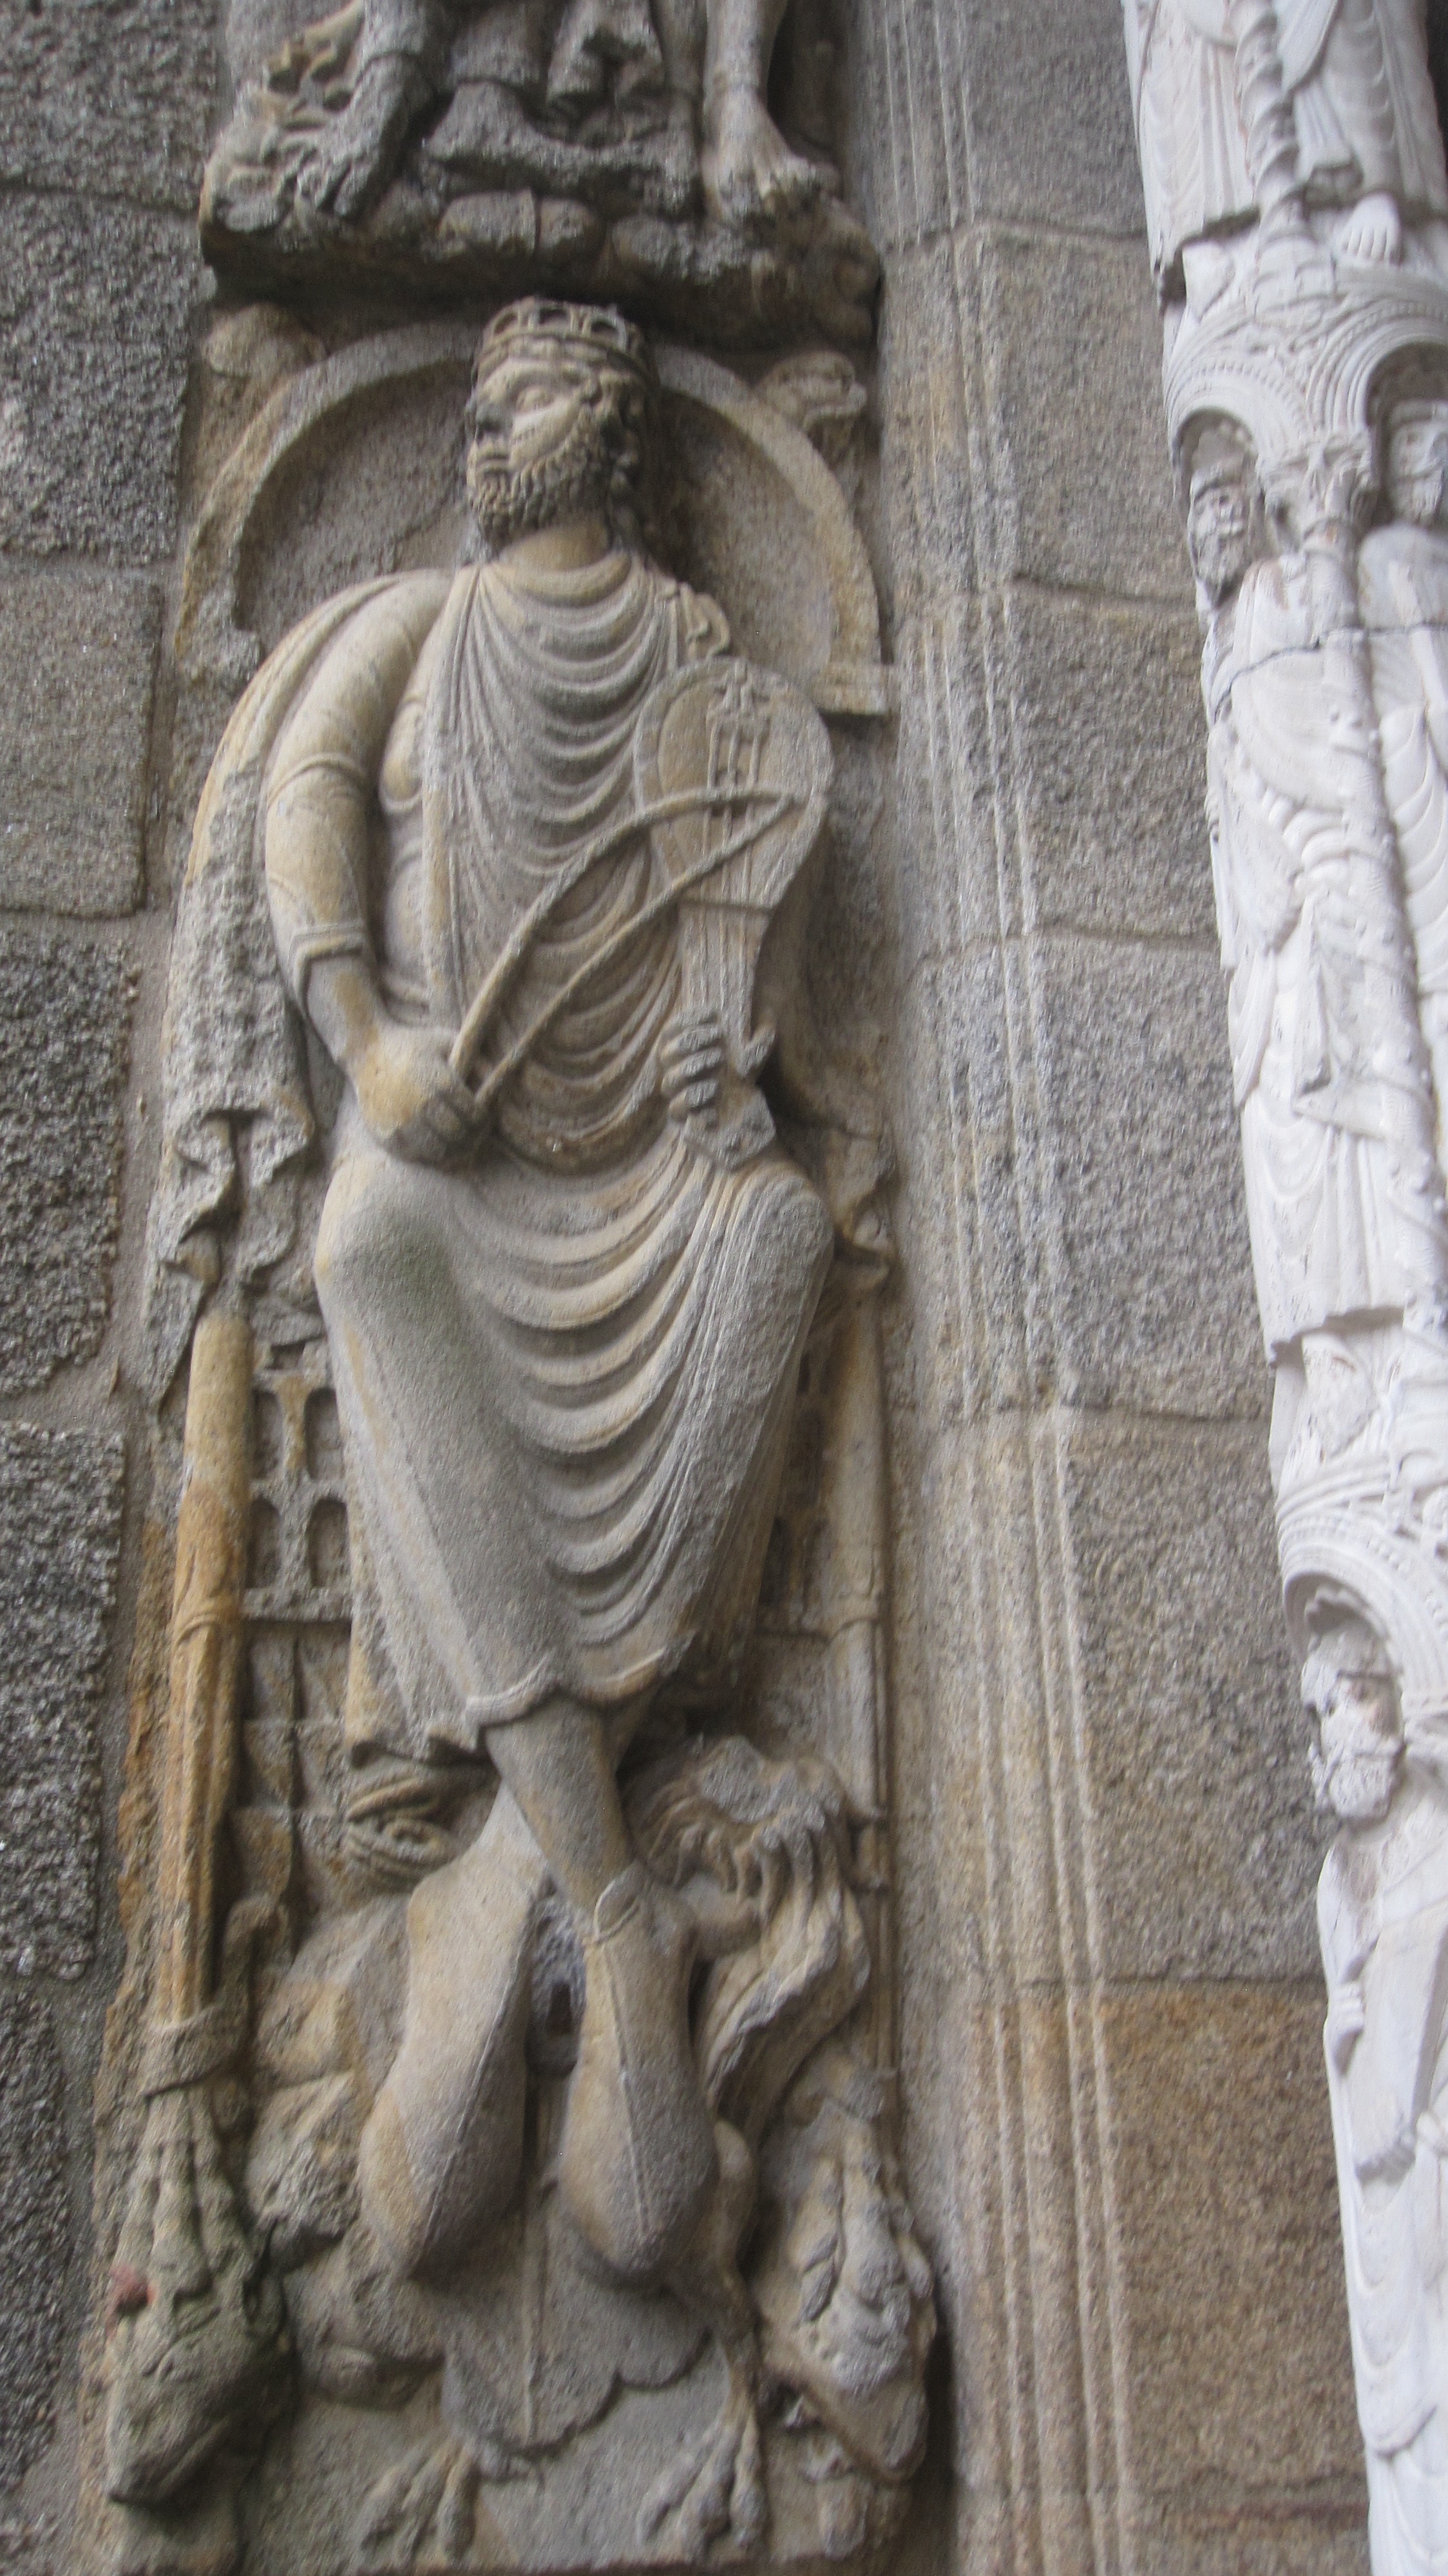 King David by Master Esteban(13th century),Part of the Romanesque doorway on the south side.